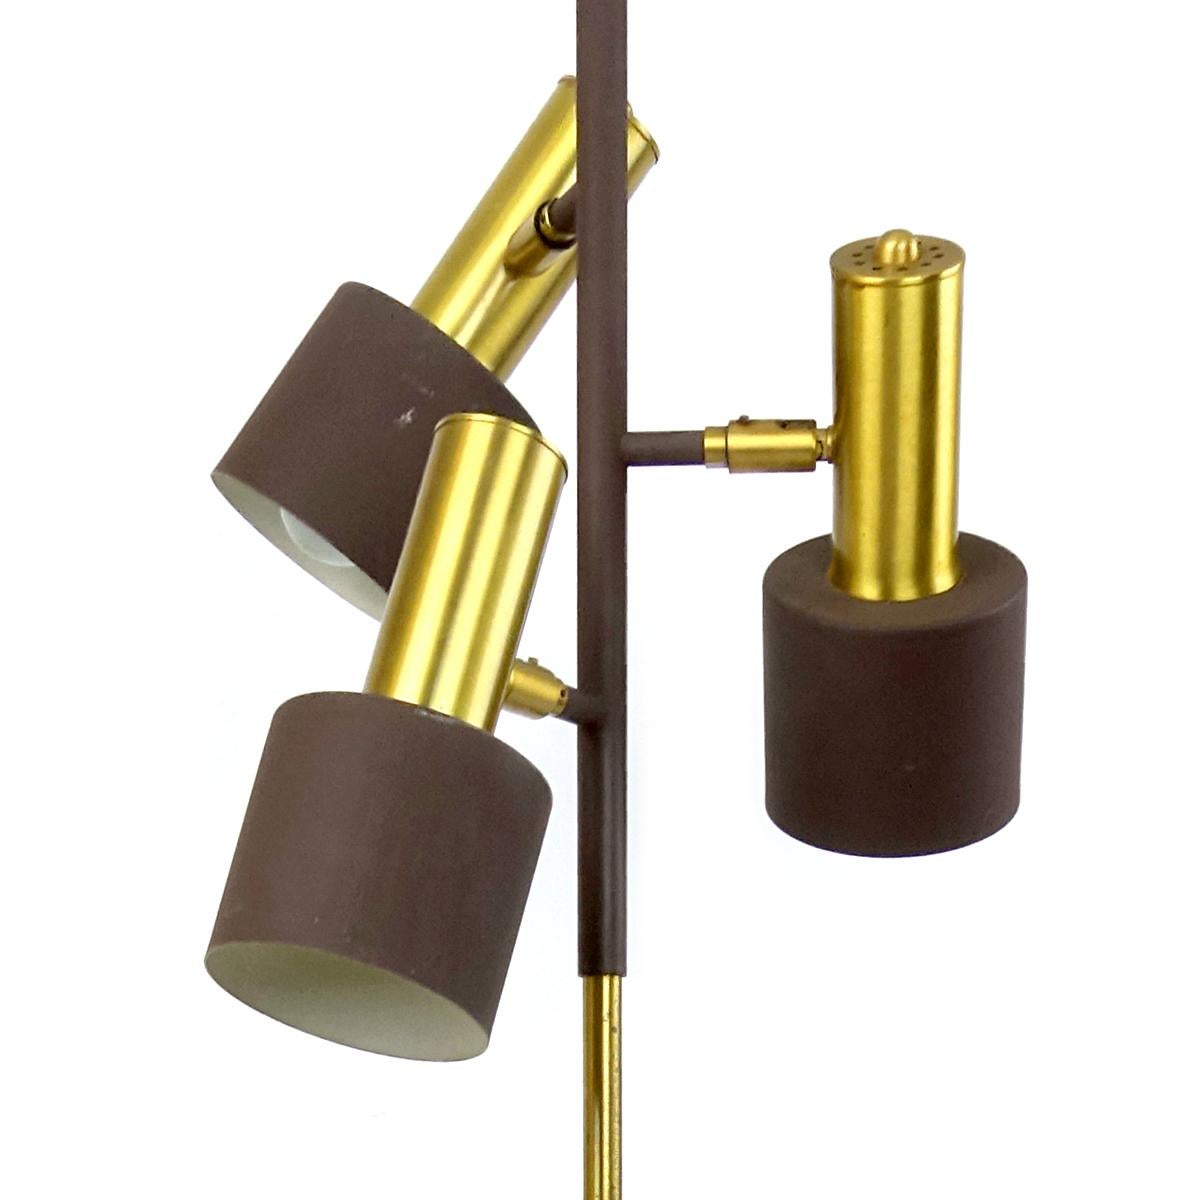 This floor lamp by famous Dutch light manufacturer RAAK Amsterdam has three lights that can be turned in about every direction, making it ideal for corners that need both uplighting and downlighting.
The lamp is made of steel and brass, with its